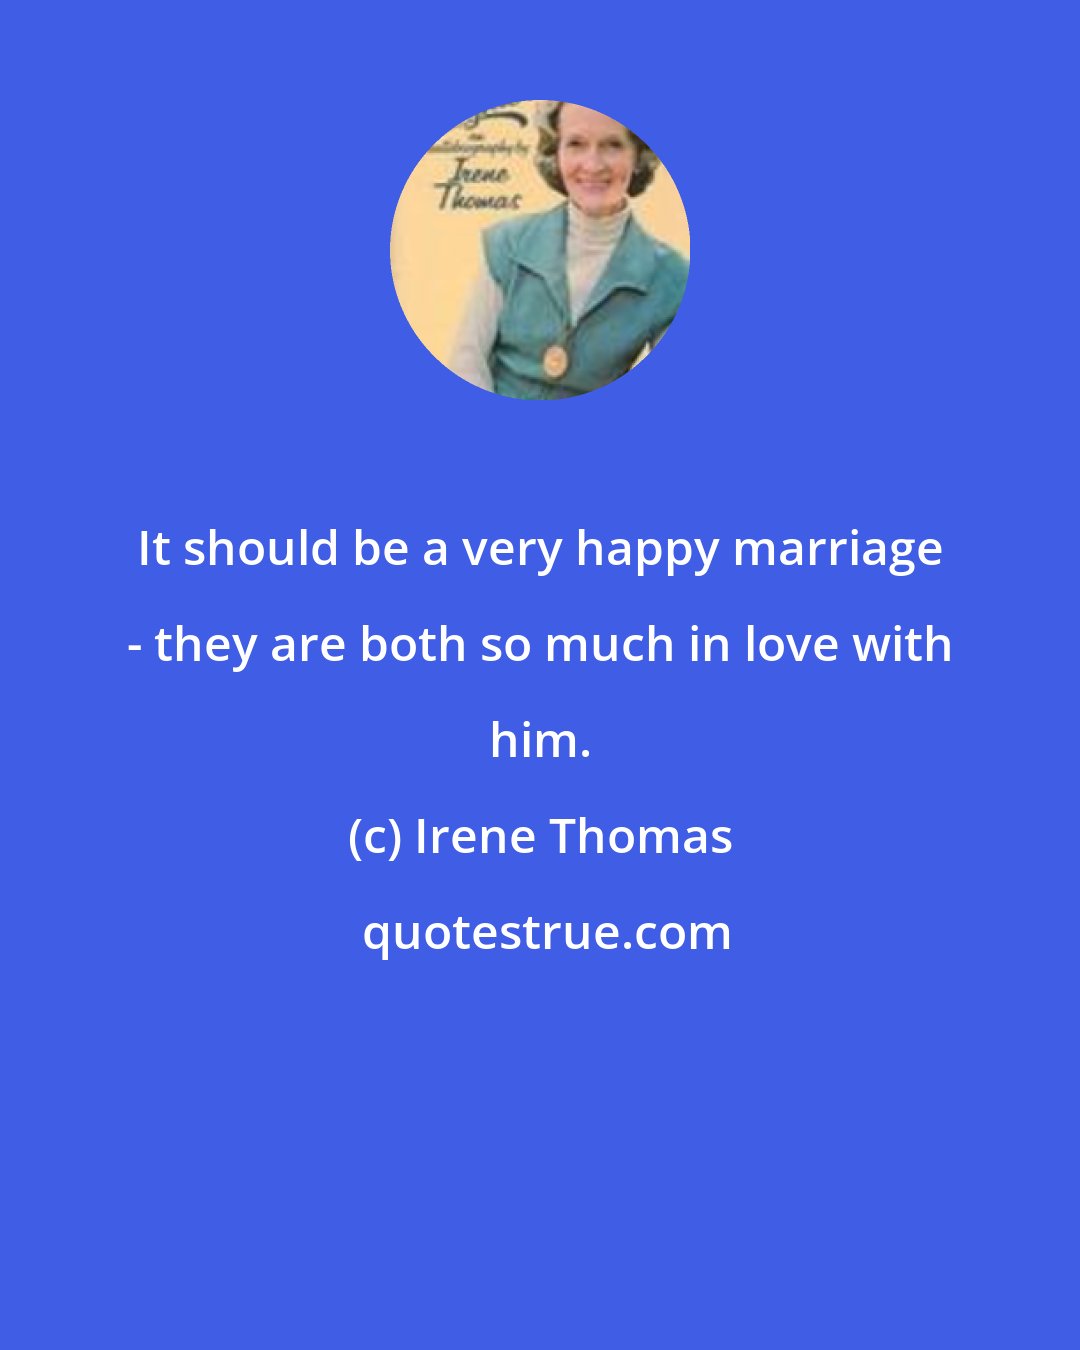 Irene Thomas: It should be a very happy marriage - they are both so much in love with him.